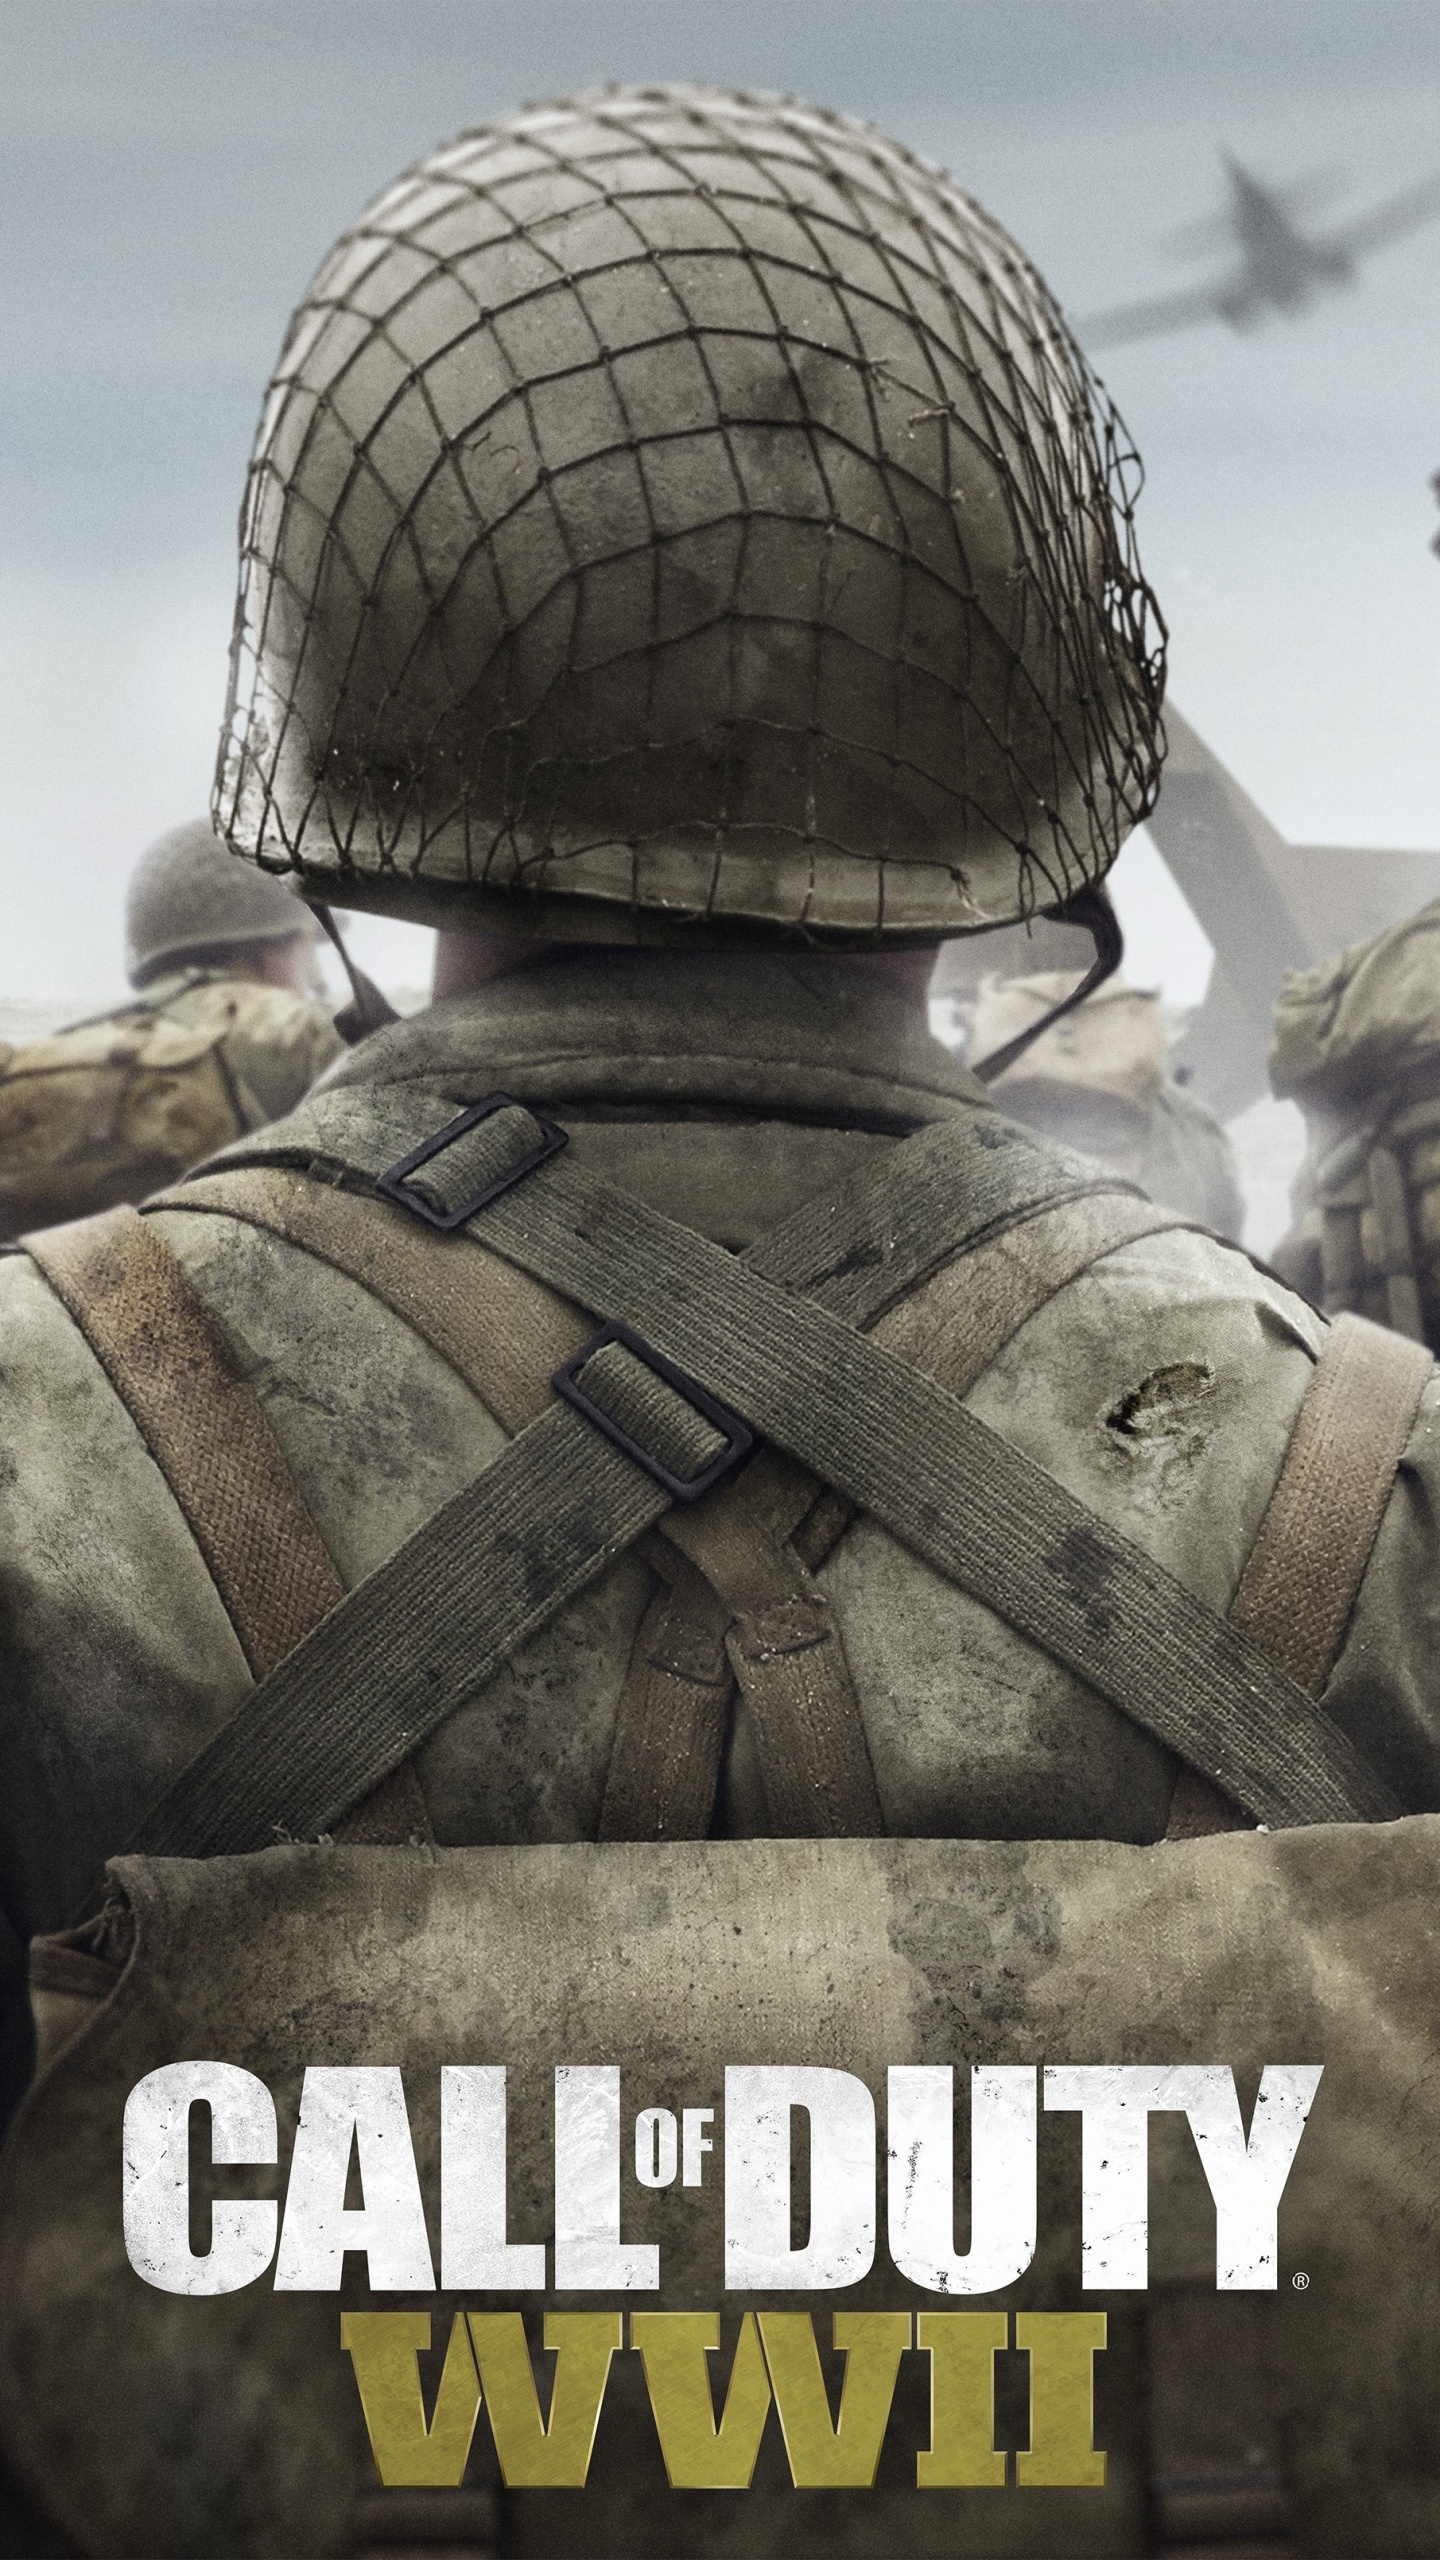 Call of Duty Ww2, Call of Duty WWII, Activision, Sledgehammer Games, Soldier. Wallpaper in 1440x2560 Resolution